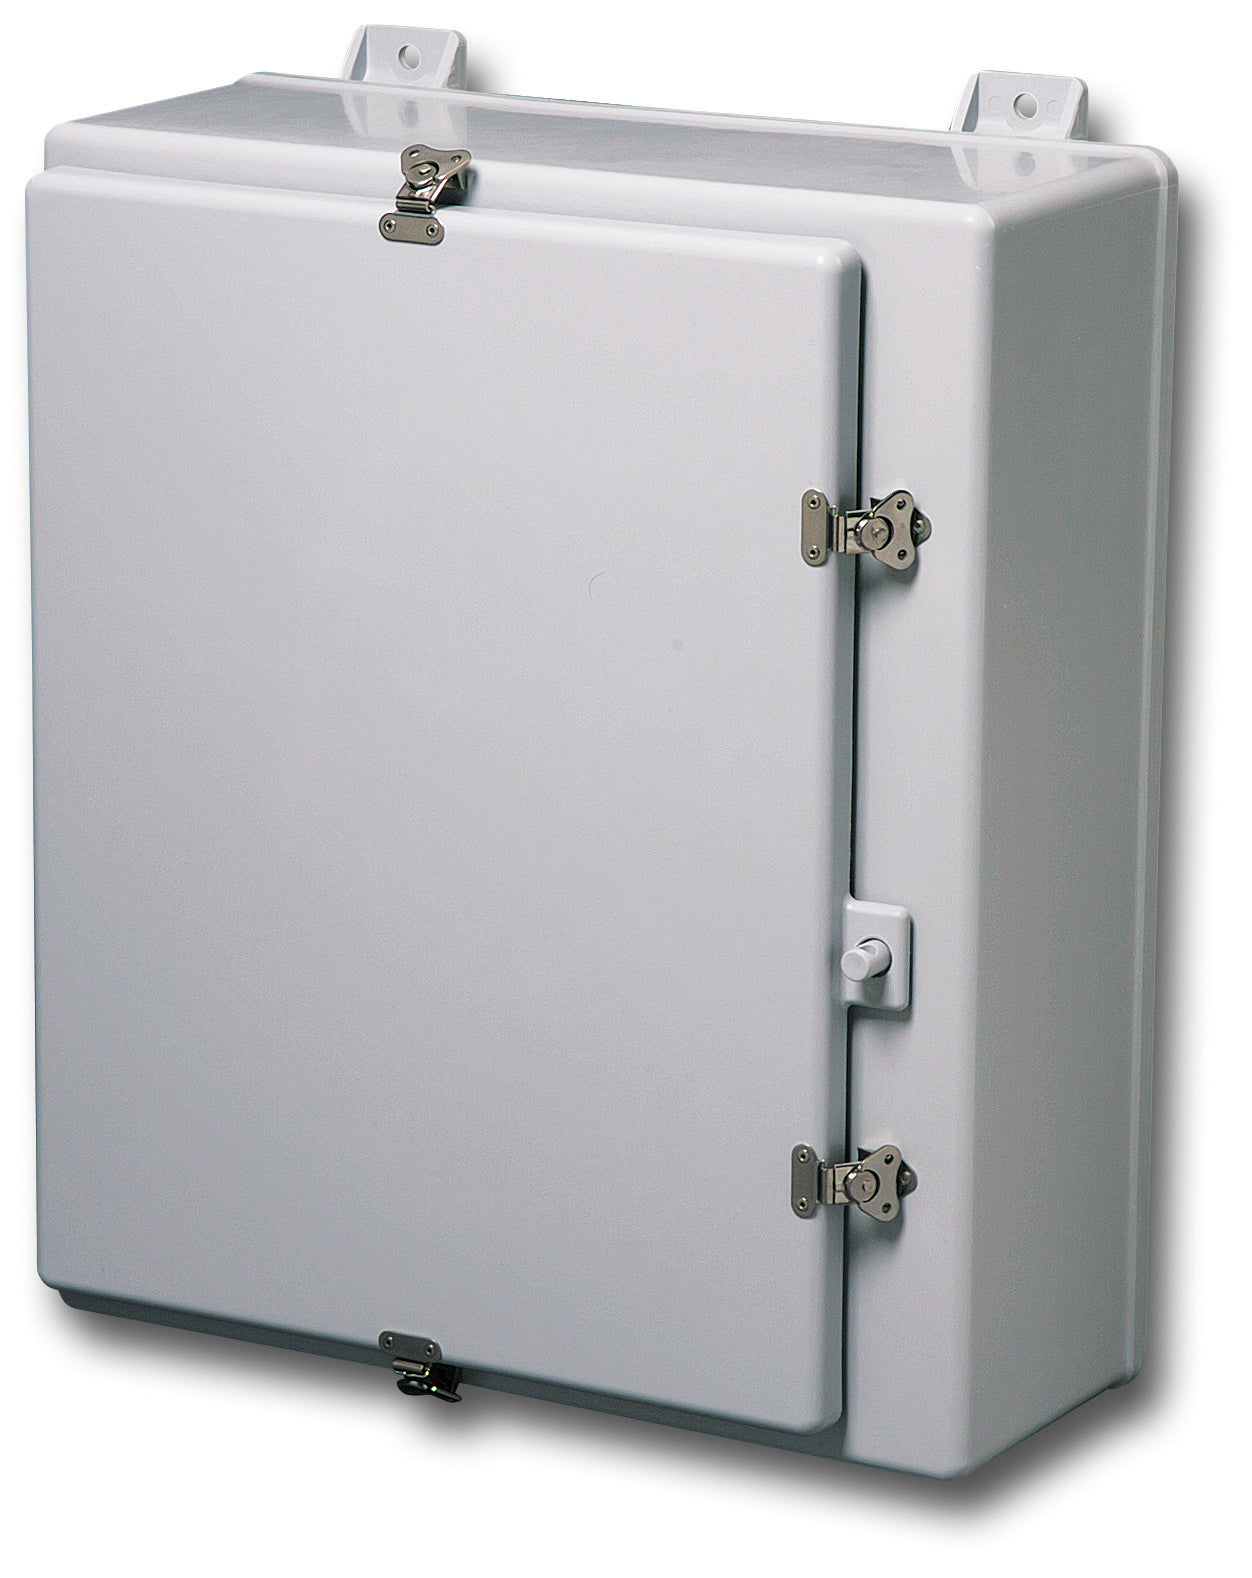 N4X   FG   Large Series     Fiberglass Enclosures with Twist Latch and Padlock Provision